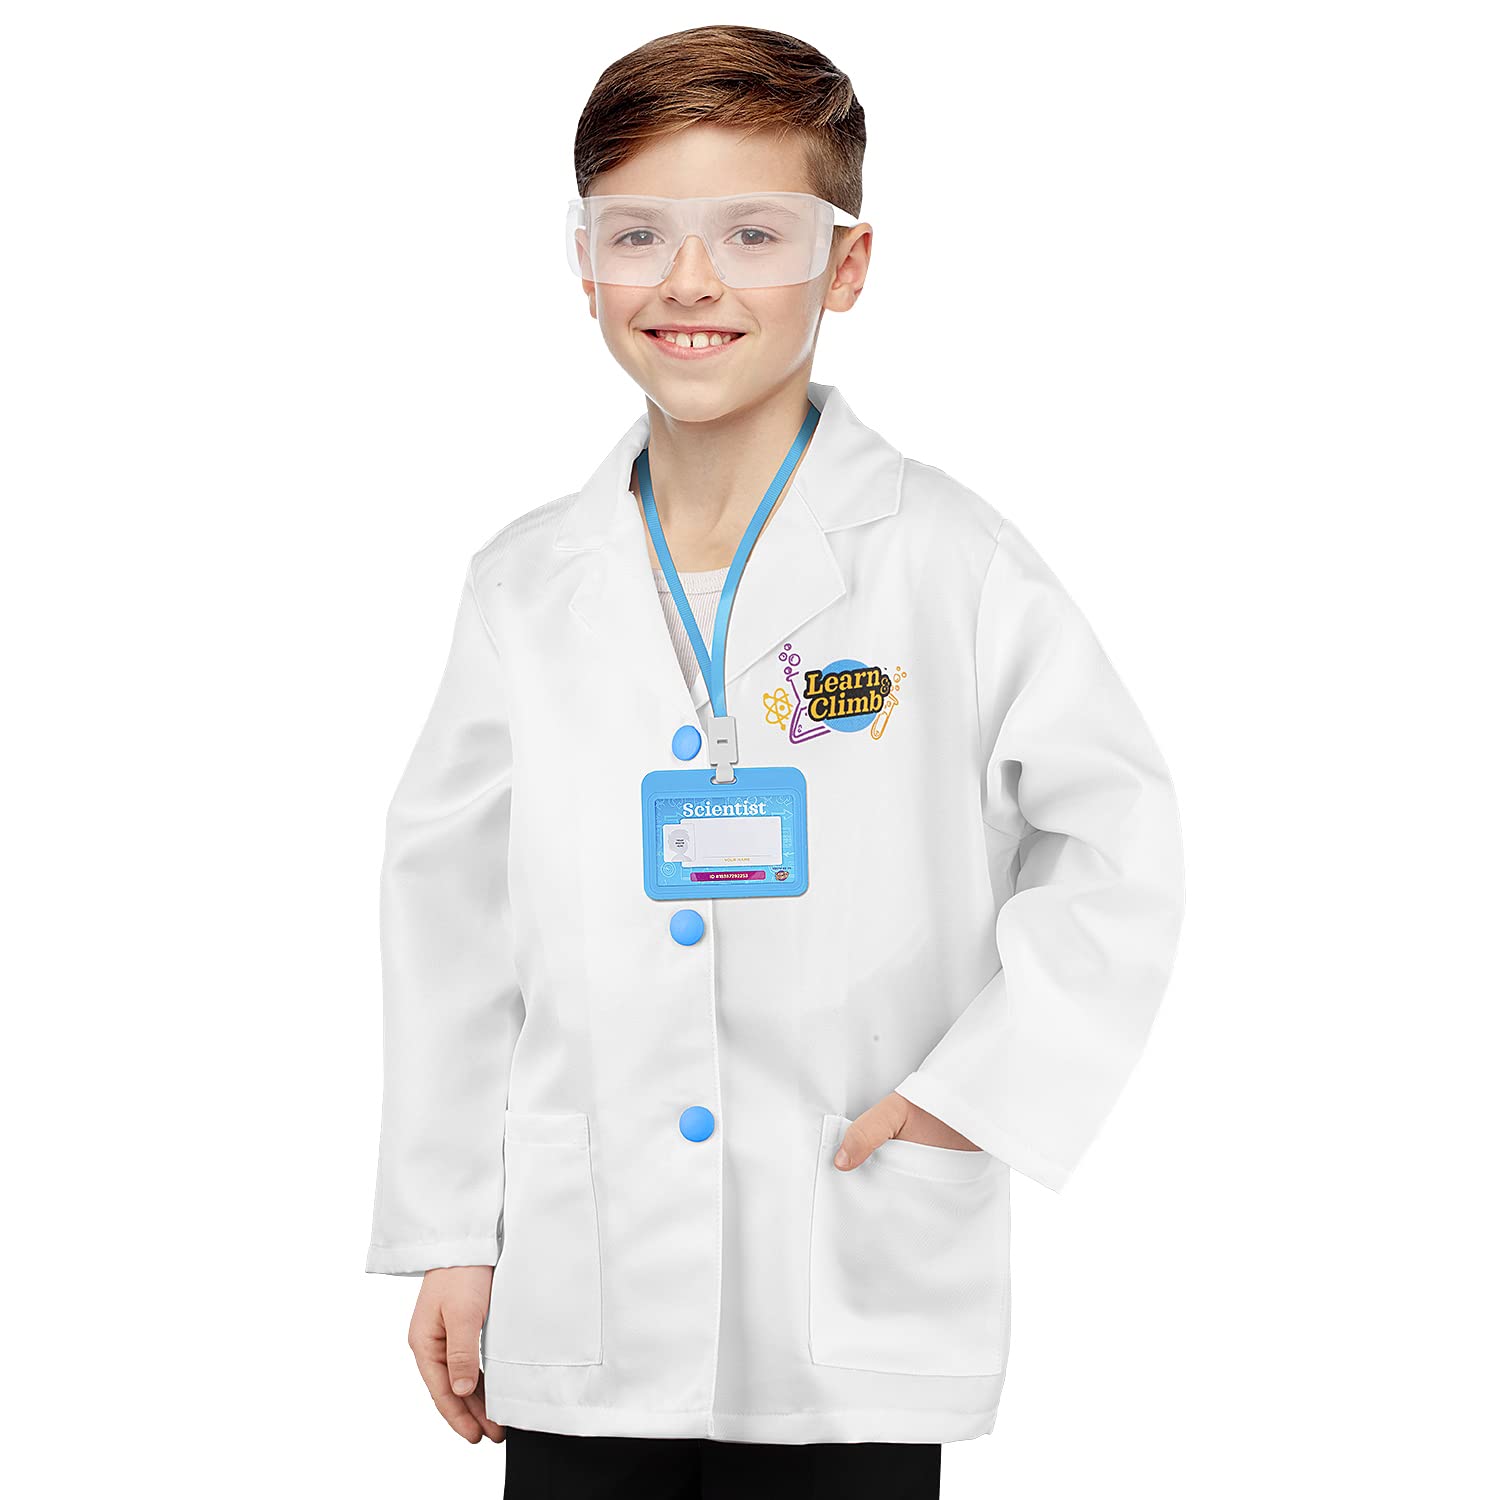 Book Cover Learn & Climb Scientist Lab Coat for Kids Ages 3-7. Three Piece Set Children's Scientist Costume with Goggles & ID Card